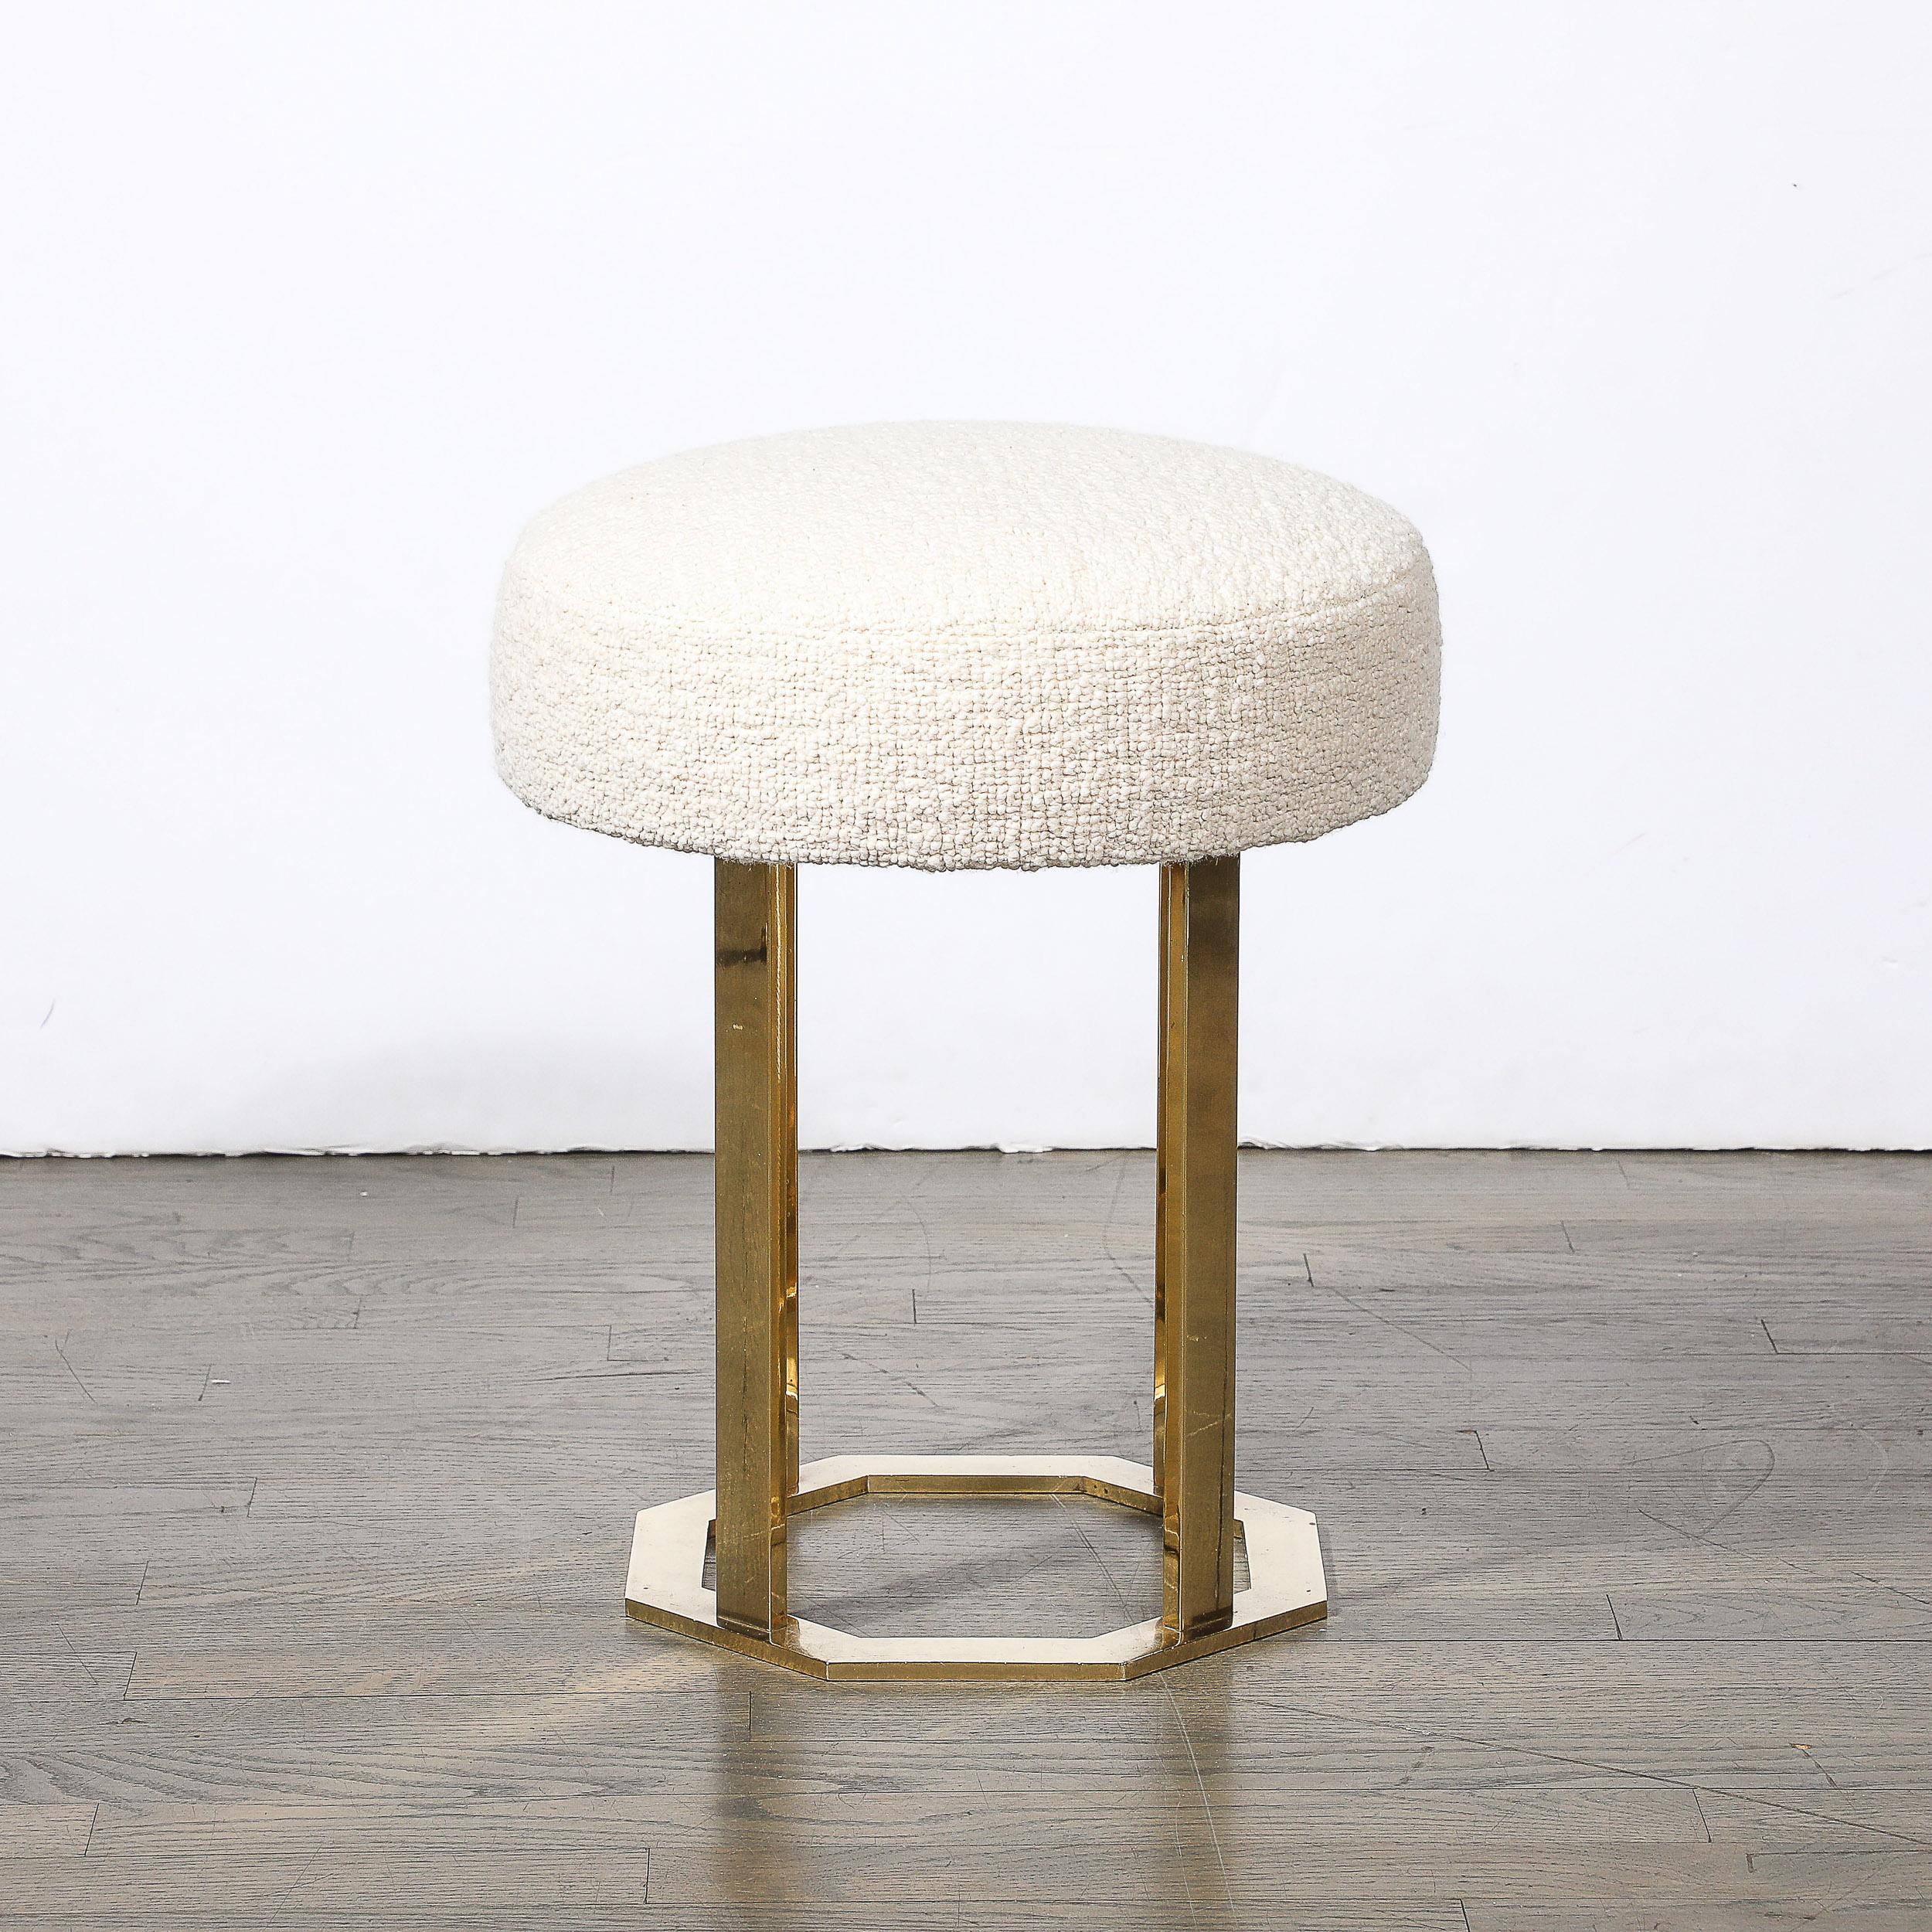 Late 20th Century Mid-Century Modernist Octagonal Polished Brass Base Stool in Holly Hunt Boucle For Sale